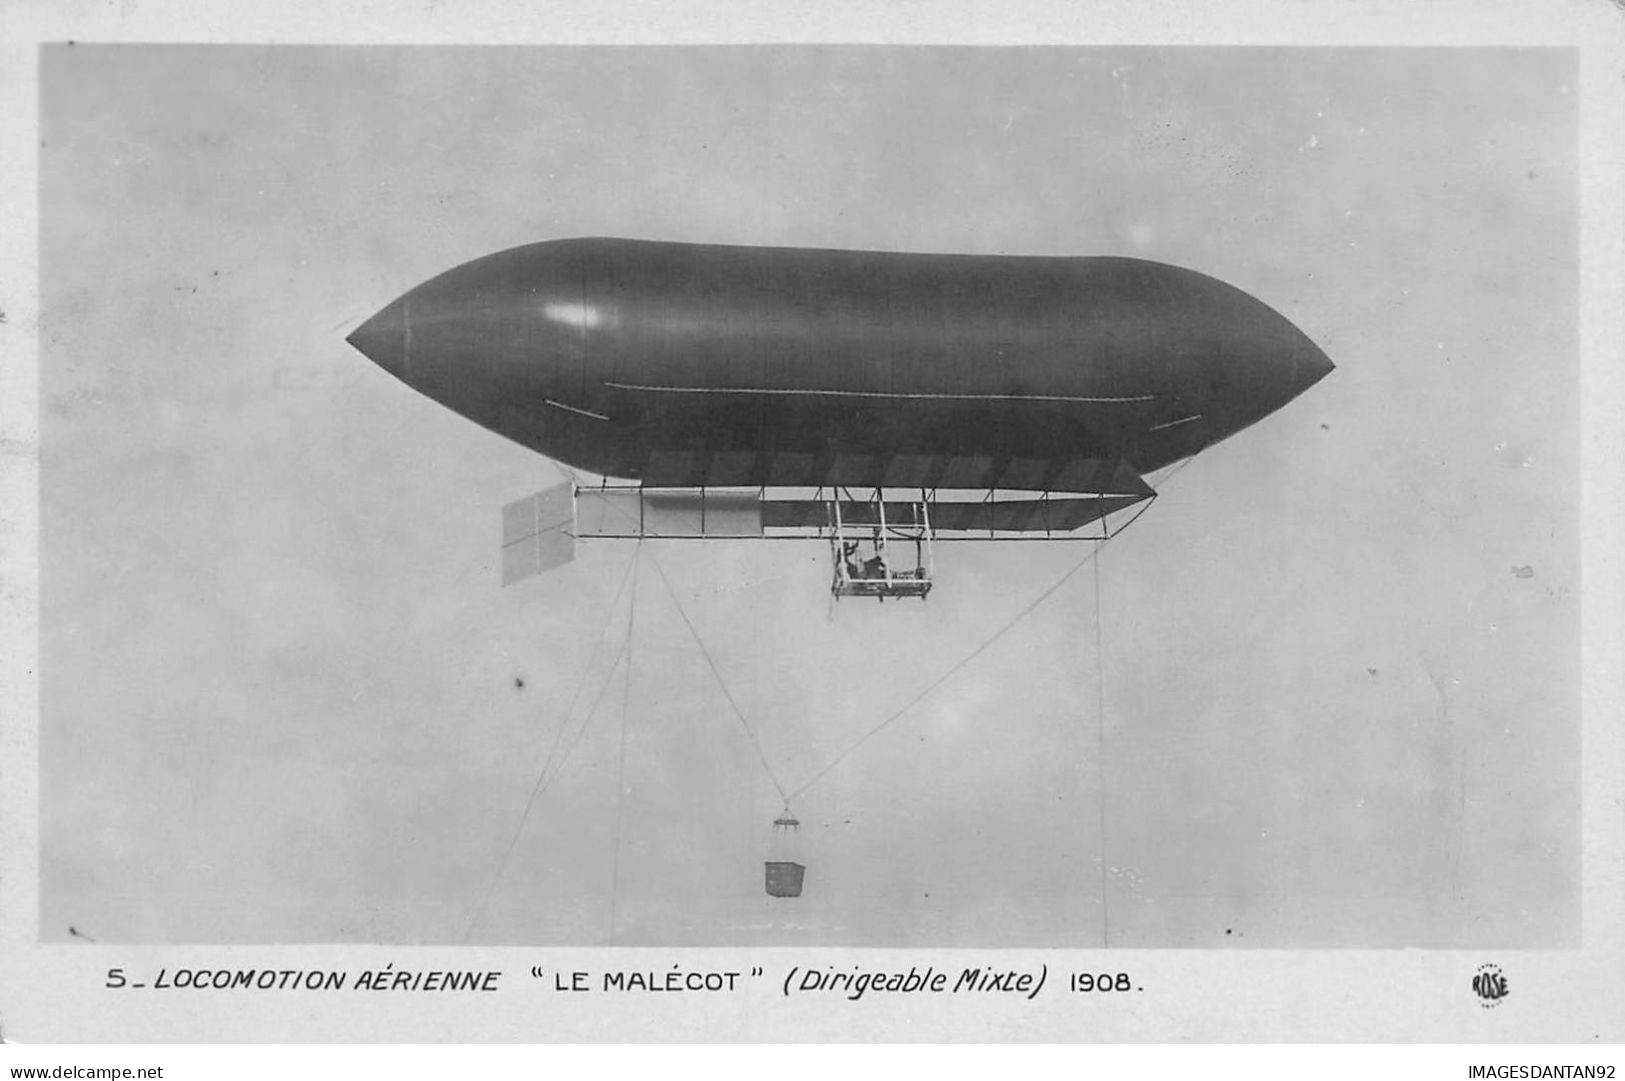 AVIATIONS #MK52733 LOCOMOTION AERIENNE LE MALECOT DIRIGEABLE MIXTE 1908 - Dirigeables